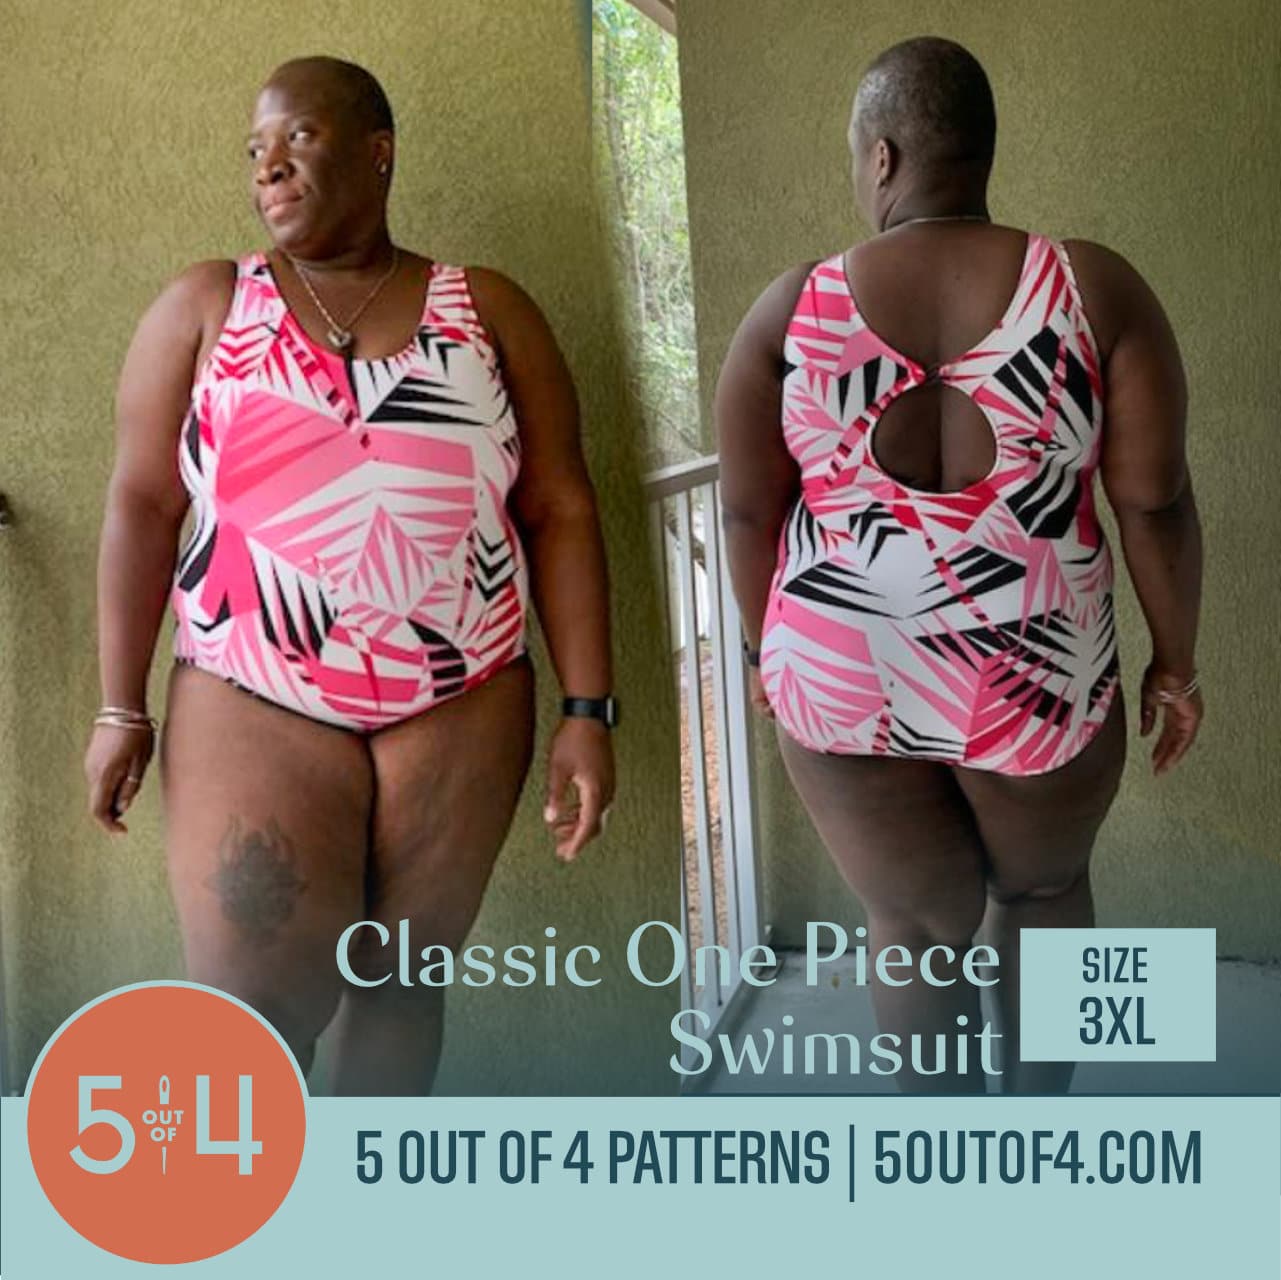 Classic One Piece Swimsuit - 5 out of 4 Patterns